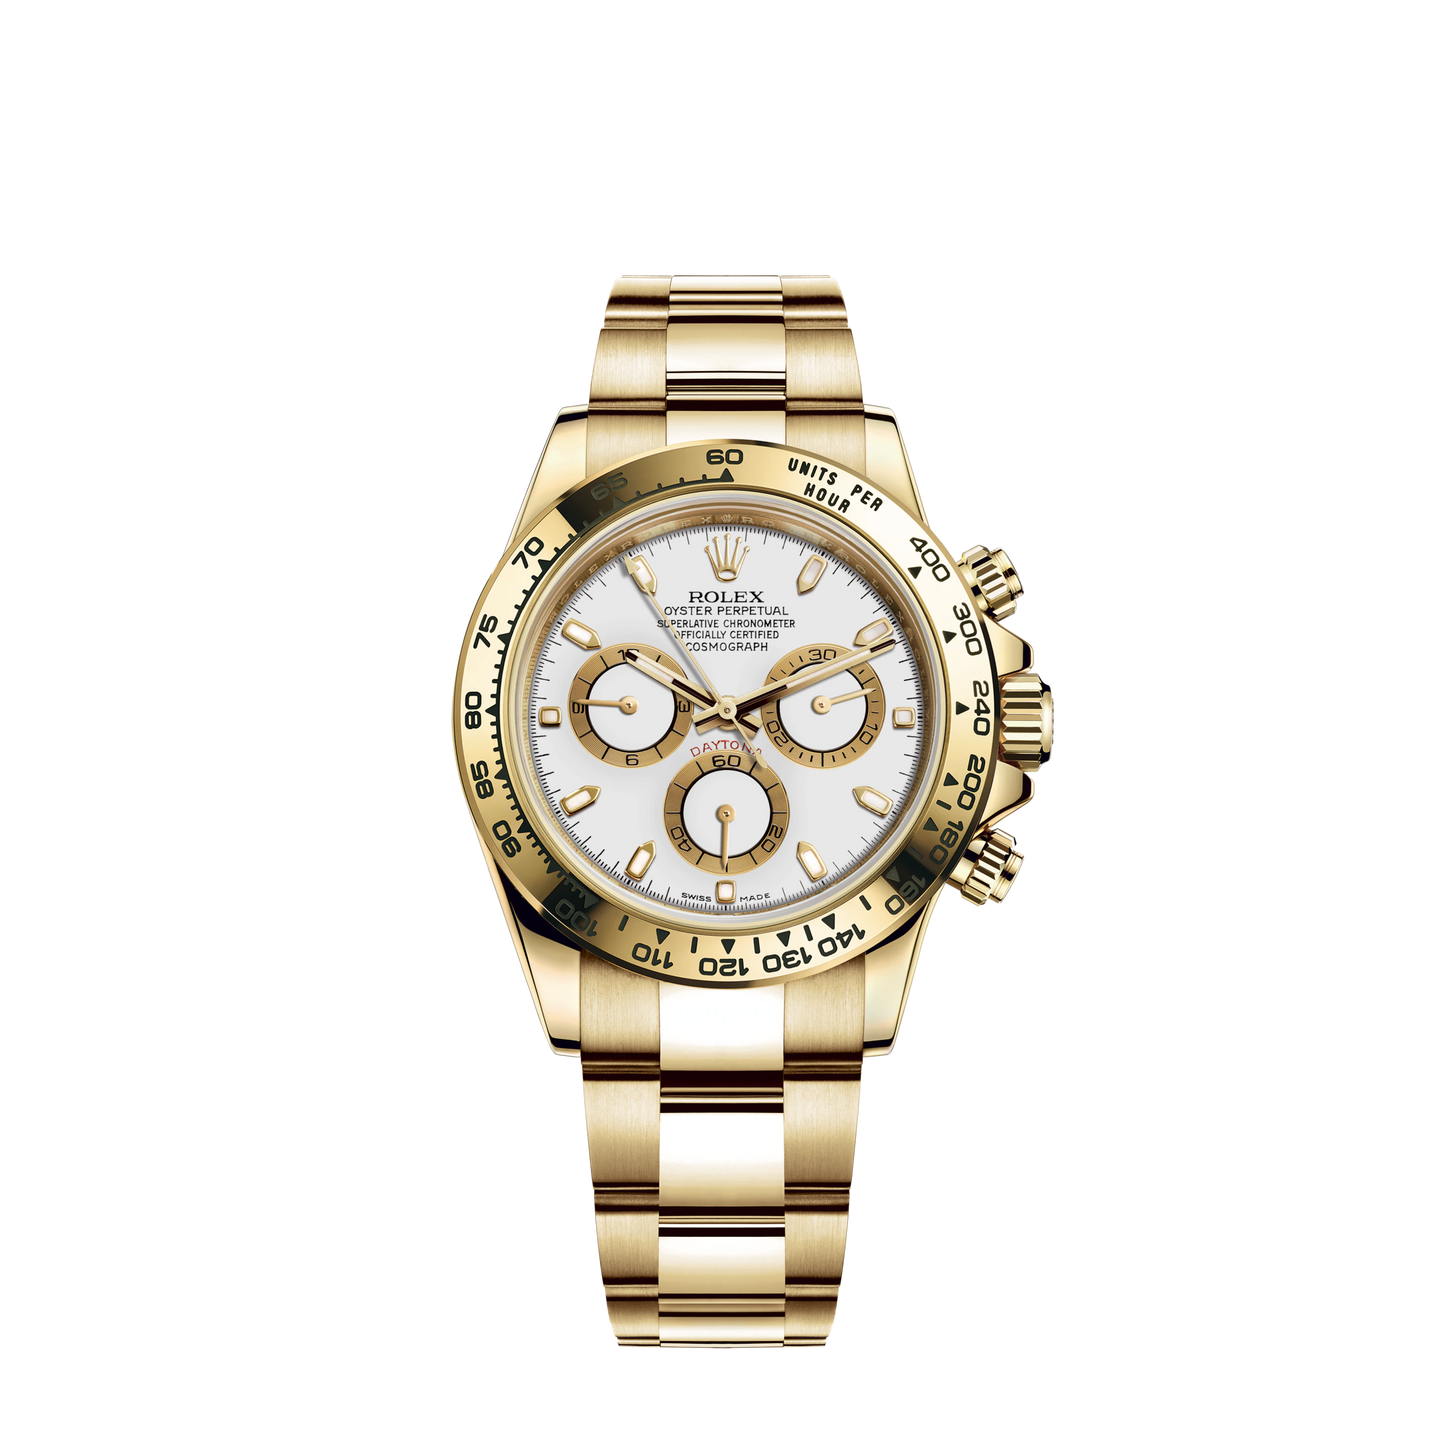 Cosmograph Daytona 40MM Oyster Bracelet White Dial 18 CT Yellow Gold Bezel With Engraved Tachymetric Scale